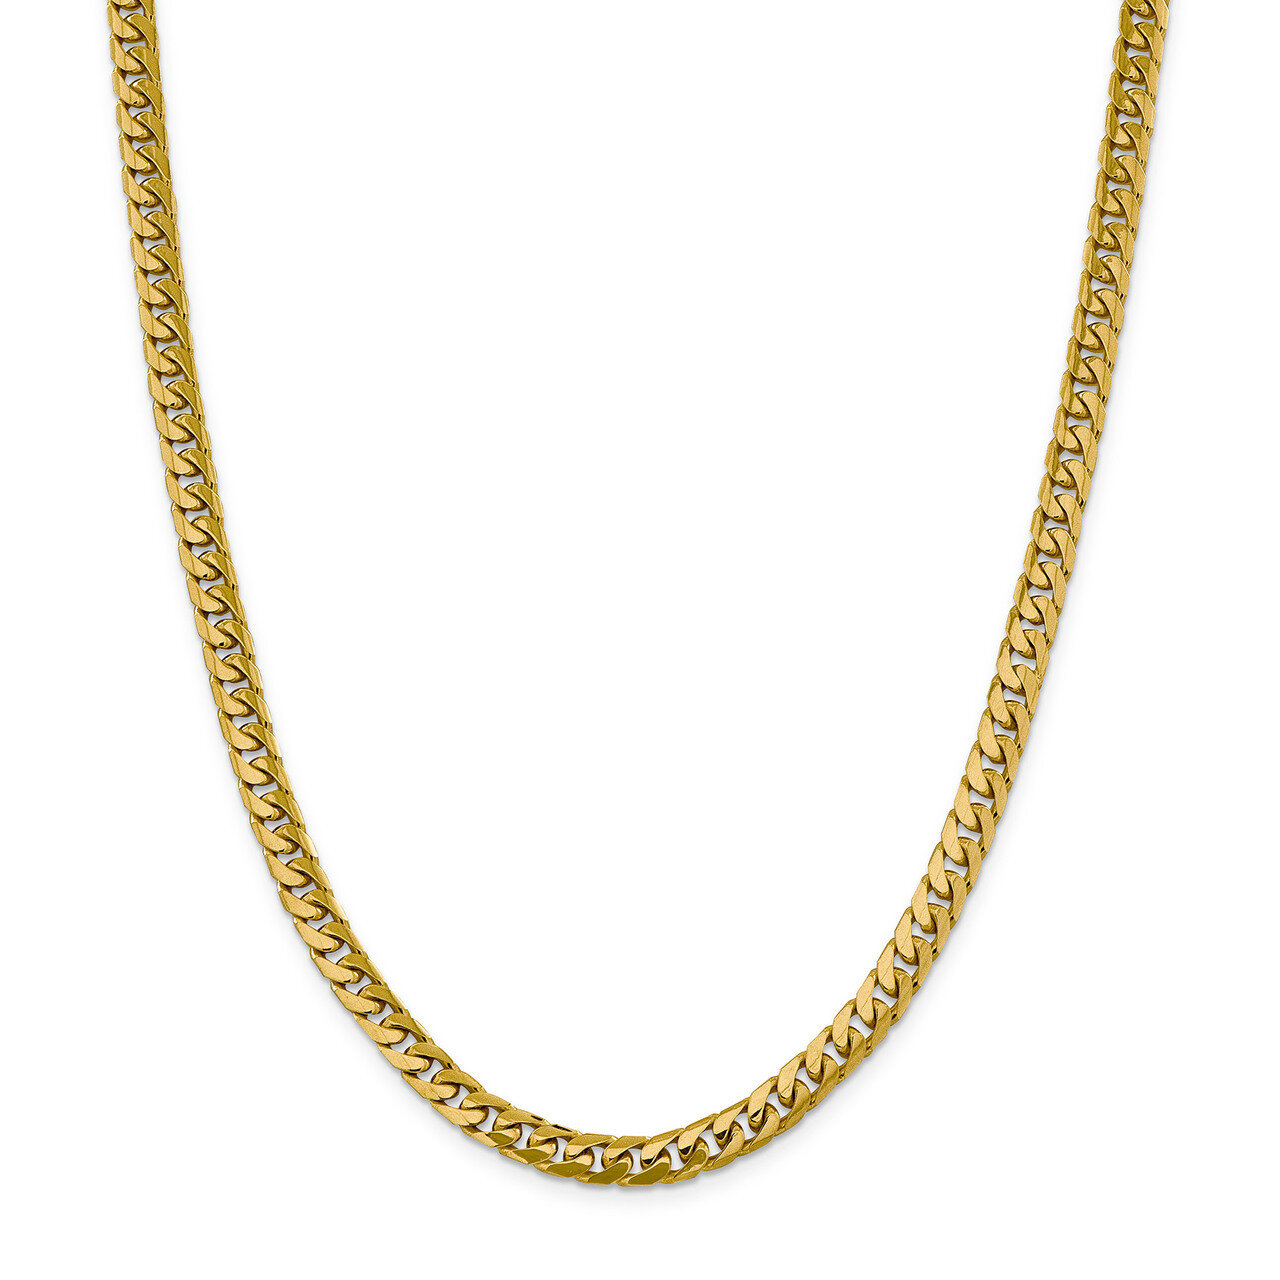 24 Inch 6.25mm Domed Curb Chain 14k Gold DCU200-24